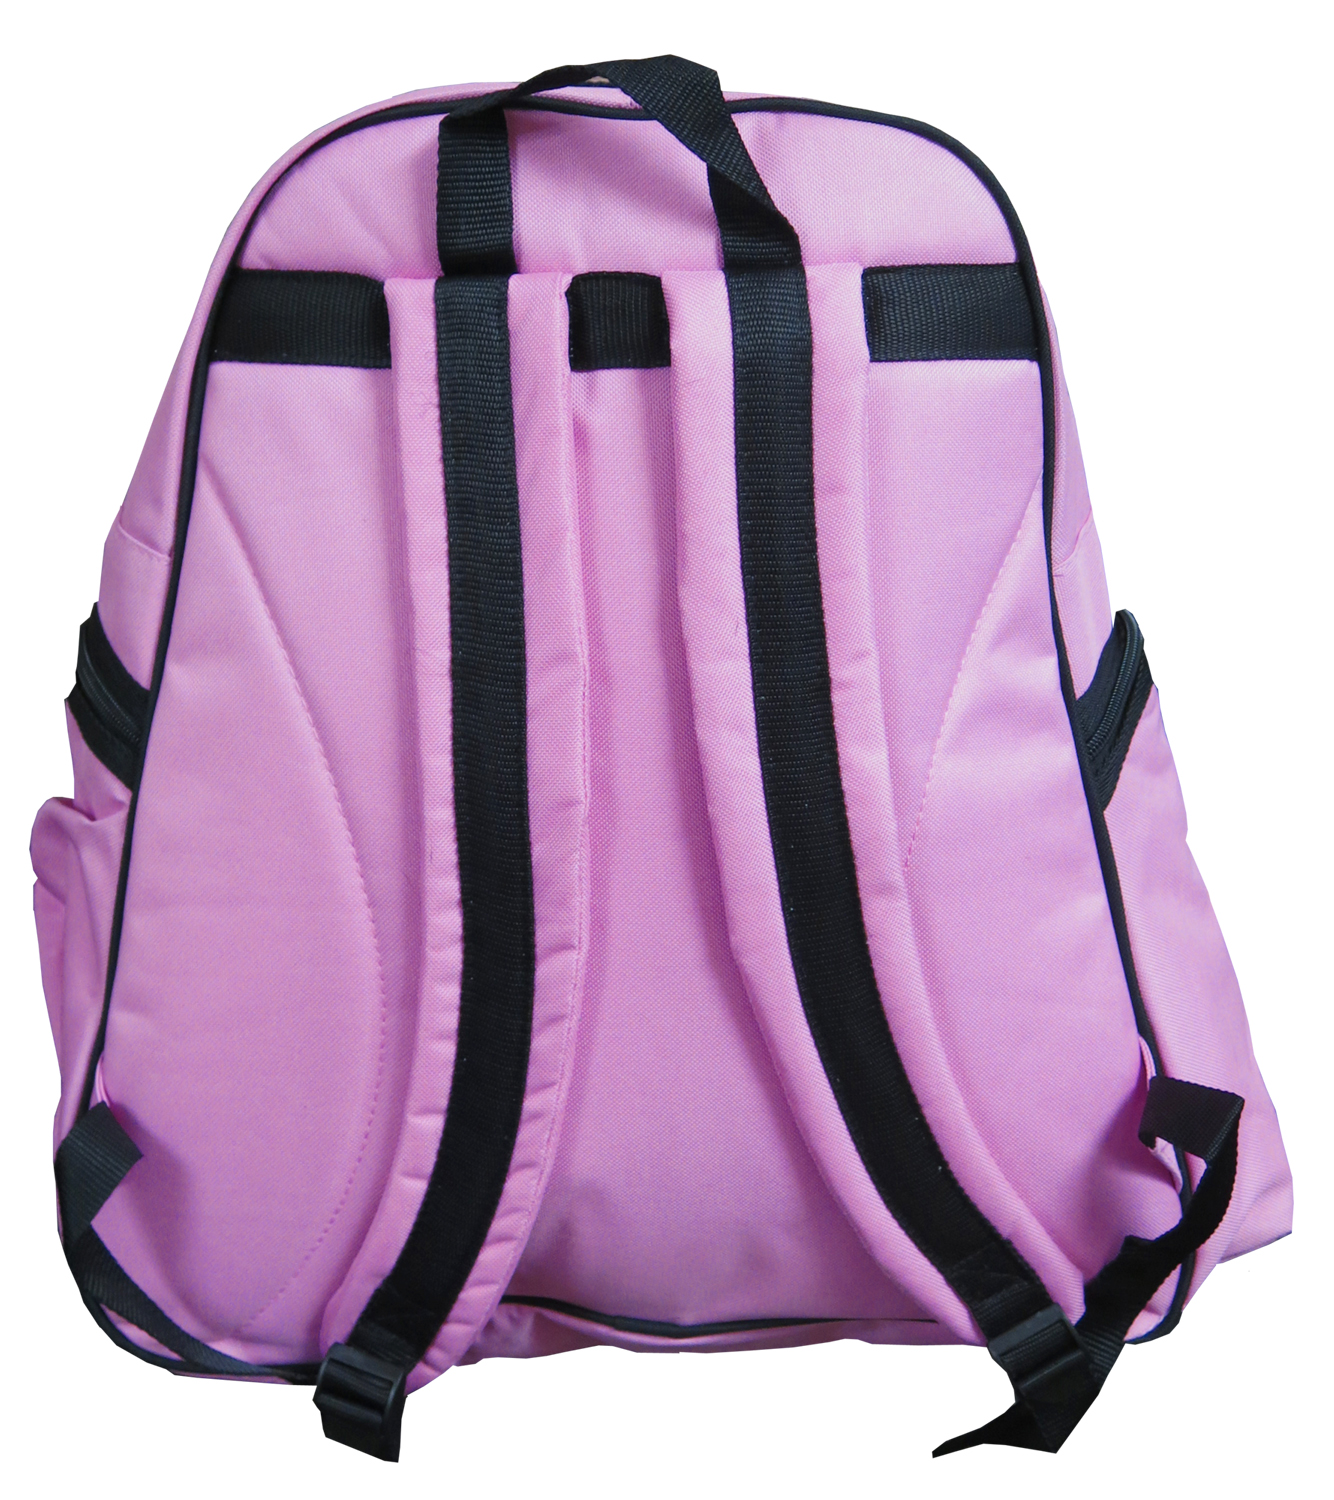 Girls Pink Flamingo Soccer Backpack or Womens Flamingo Volleyball Bag - image 3 of 4